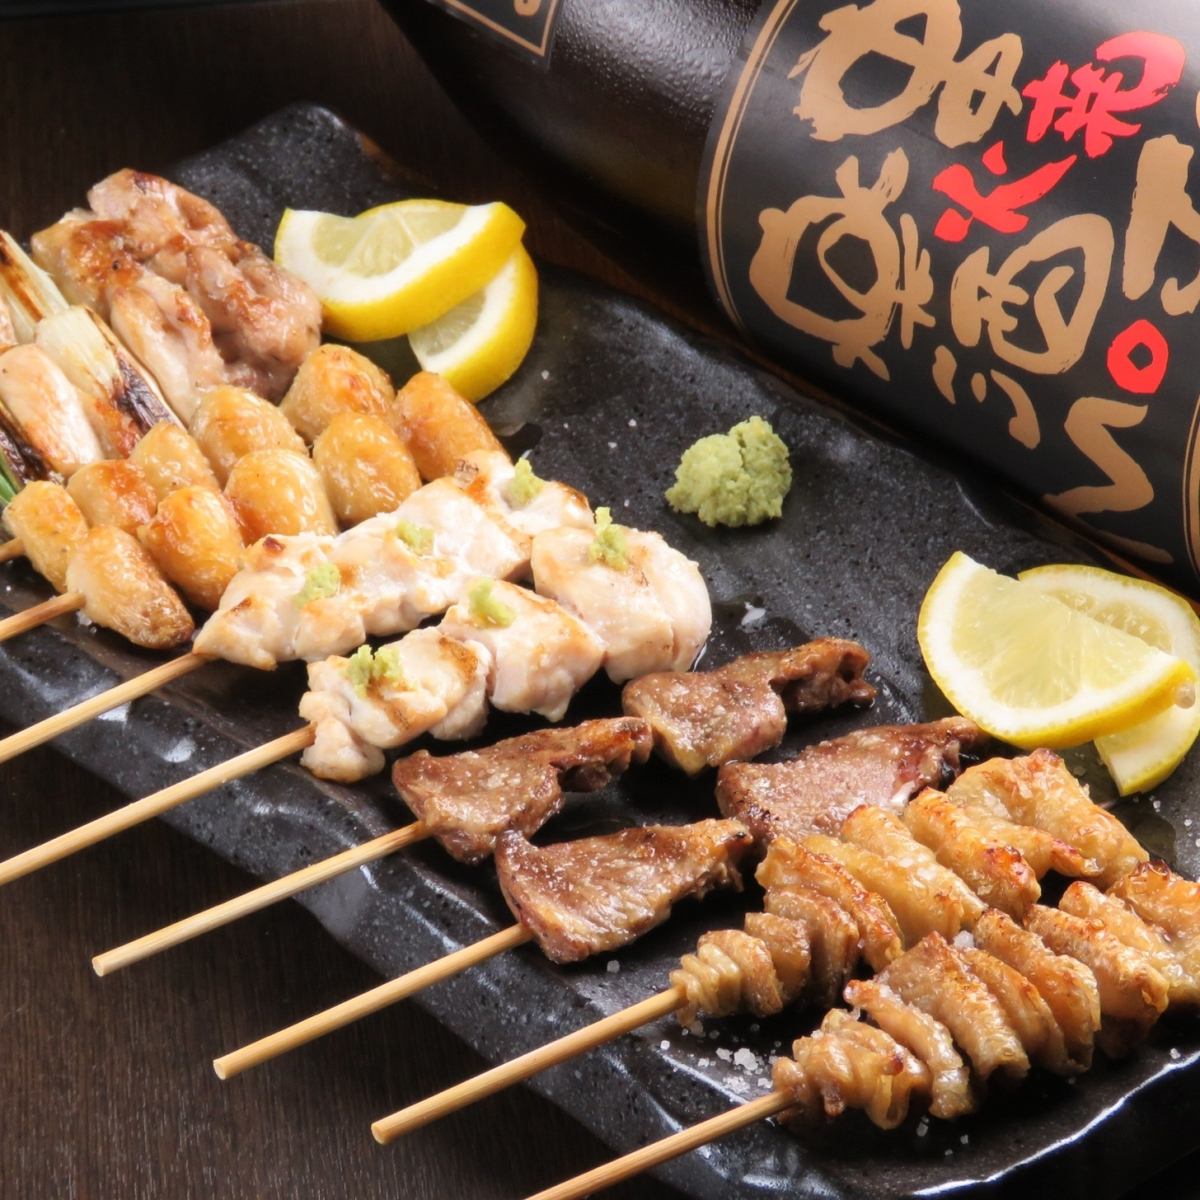 A popular yakitori restaurant full of energy and passion.